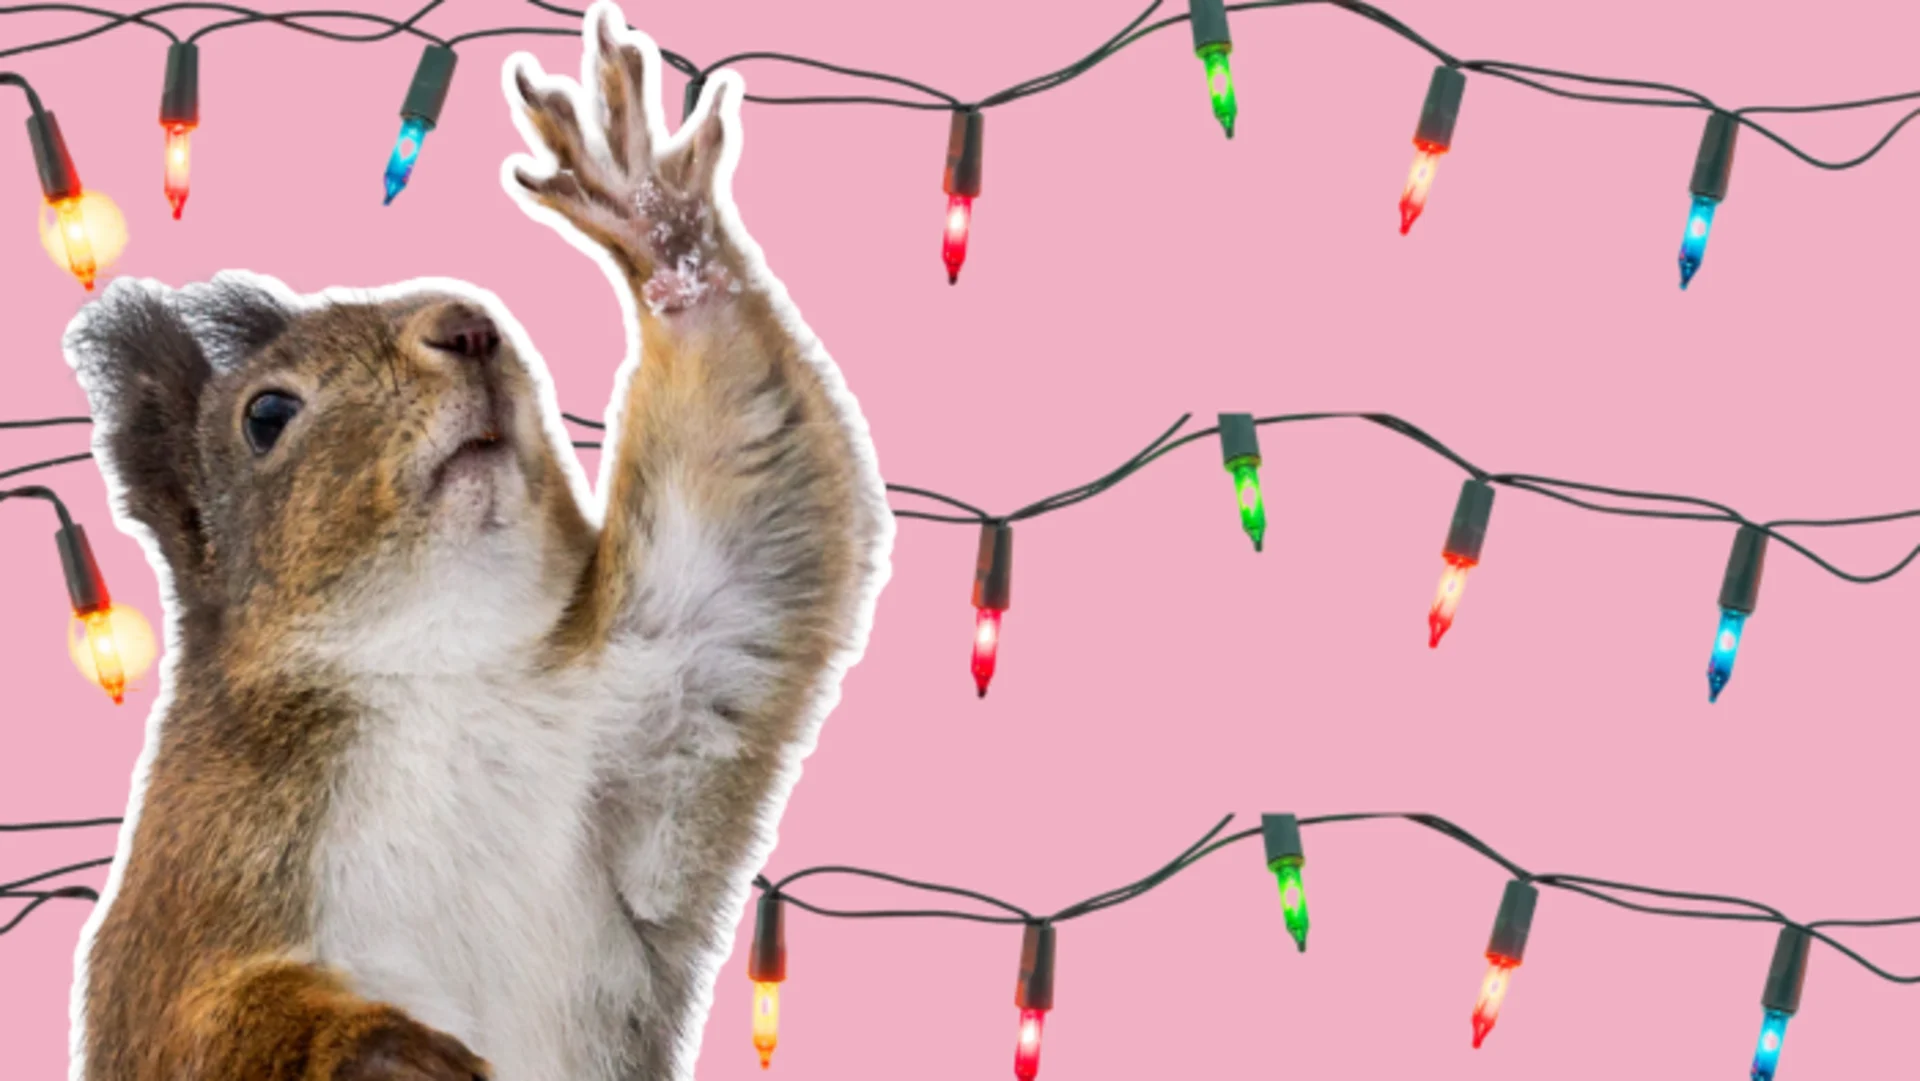 Hanging holiday lights? Don't let squirrels dim your display